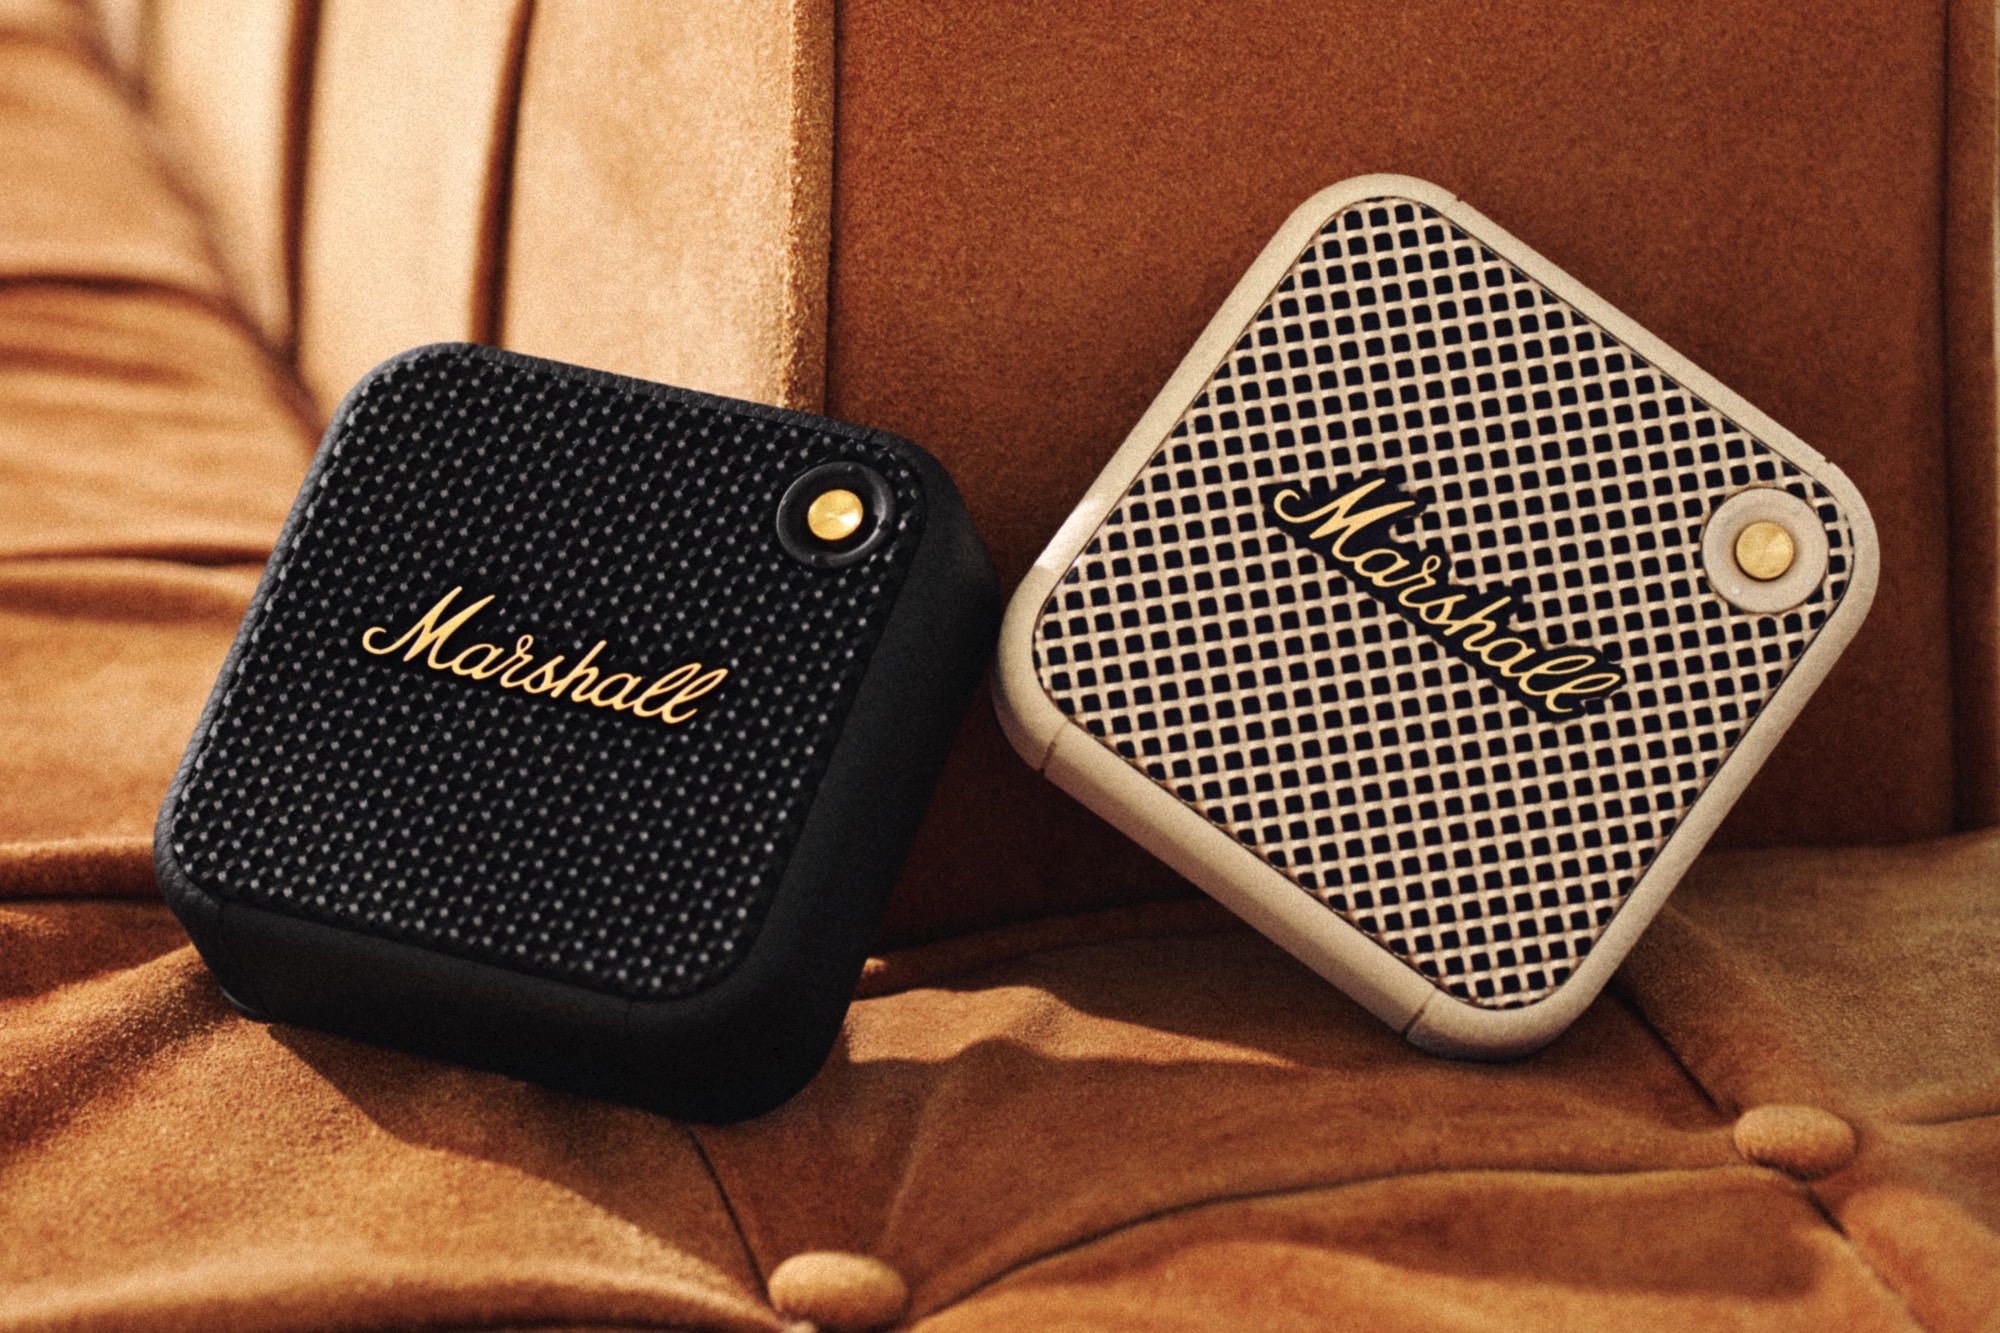 Marshall updates the Emberton and adds a palm-sized speaker